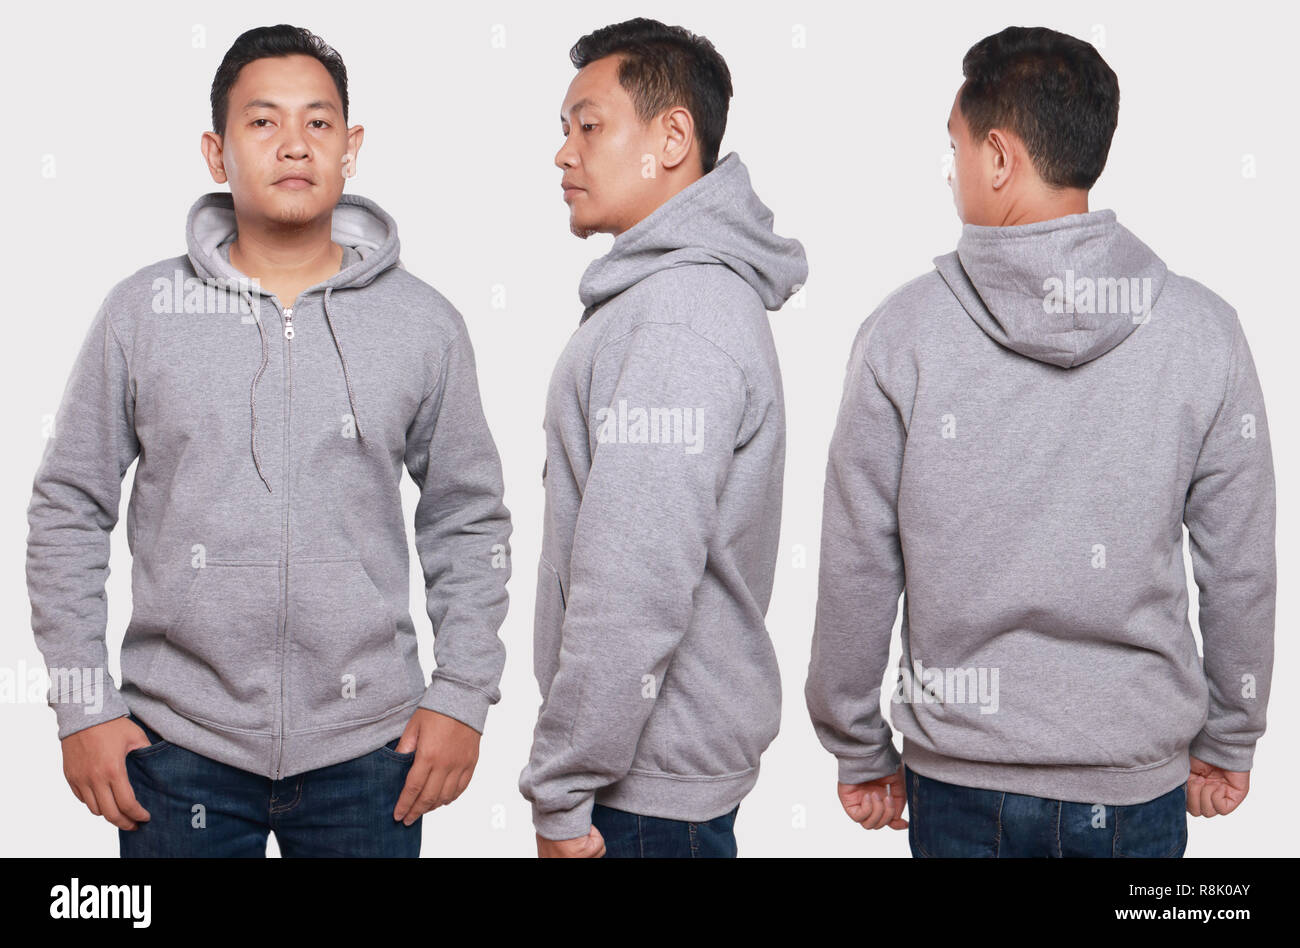 Download Blank Sweatshirt Mock Up Front Back And Side View Isolated Asian Male Model Wear Plain Gray Hoodie Mockup Hoody Design Presentation Jumper For P Stock Photo Alamy